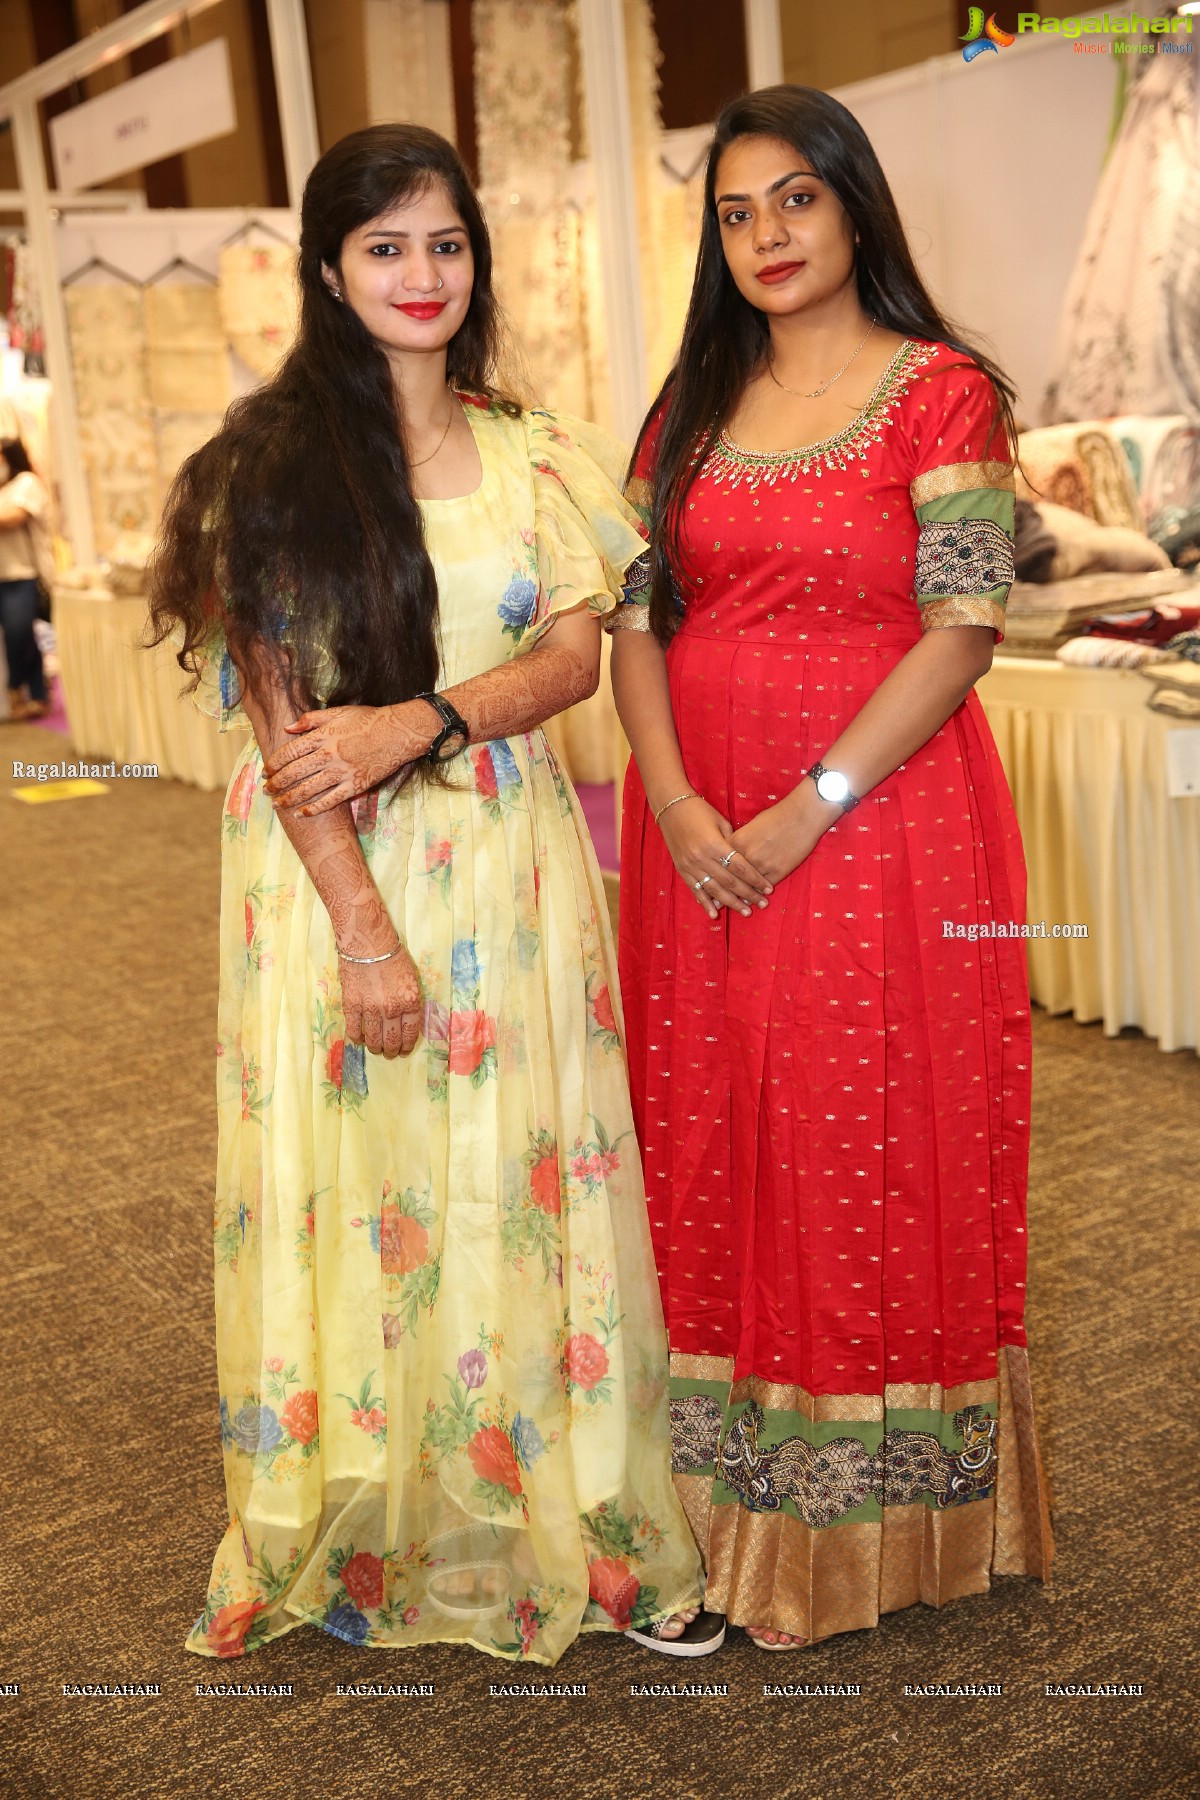 Design Library Exquisite Lifestyle Fashion Exhibition at HICC-Novotel